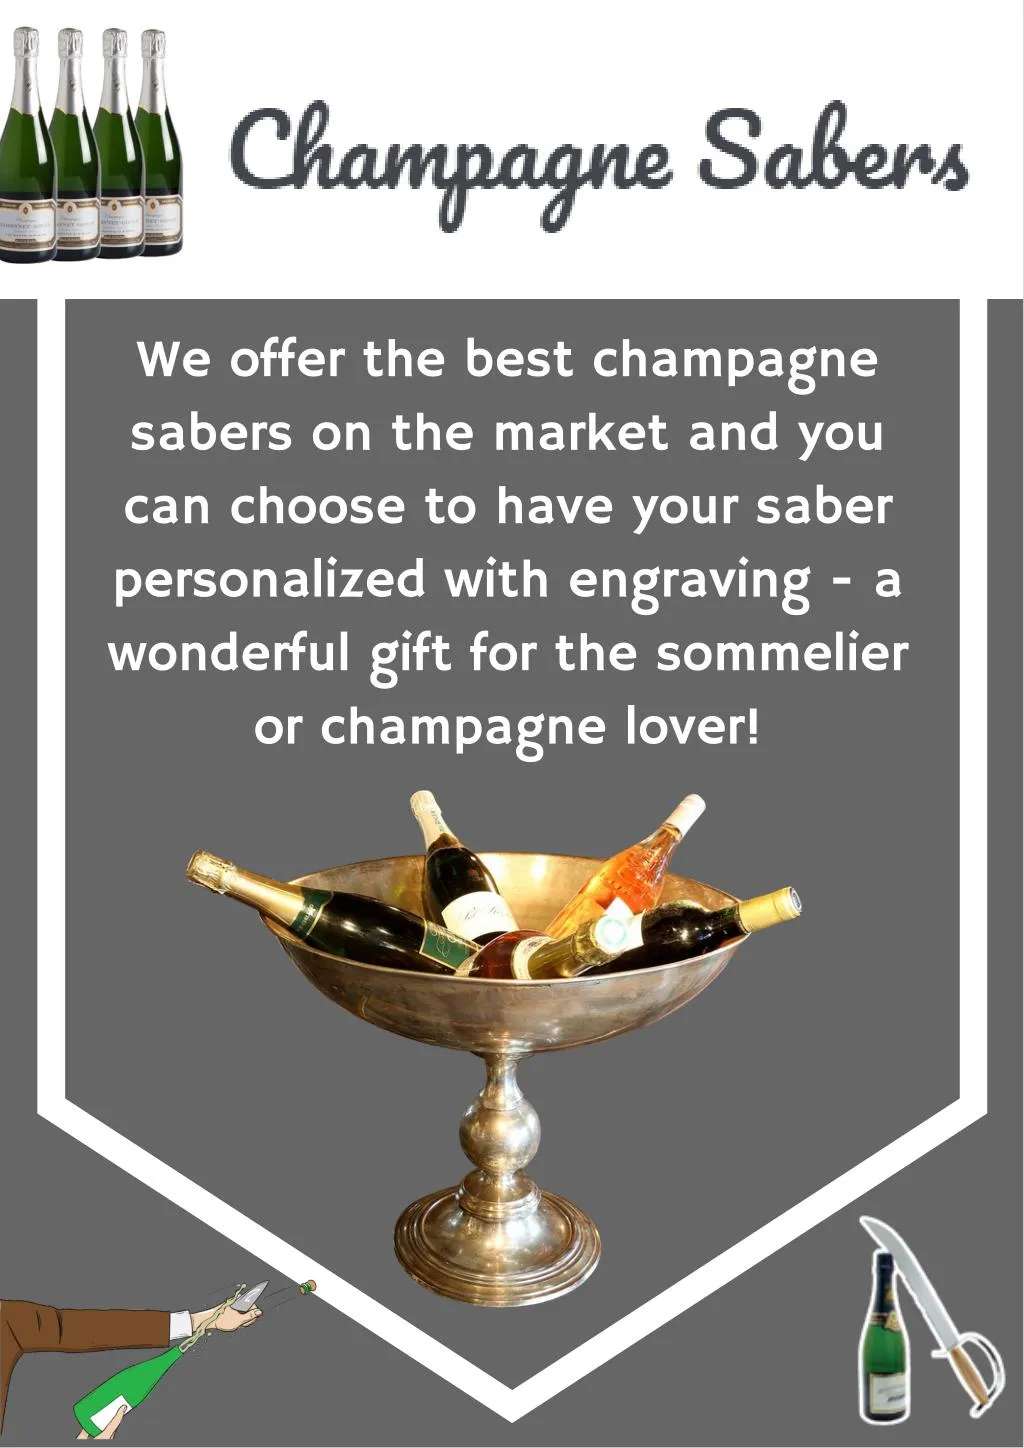 we offer the best champagne sabers on the market